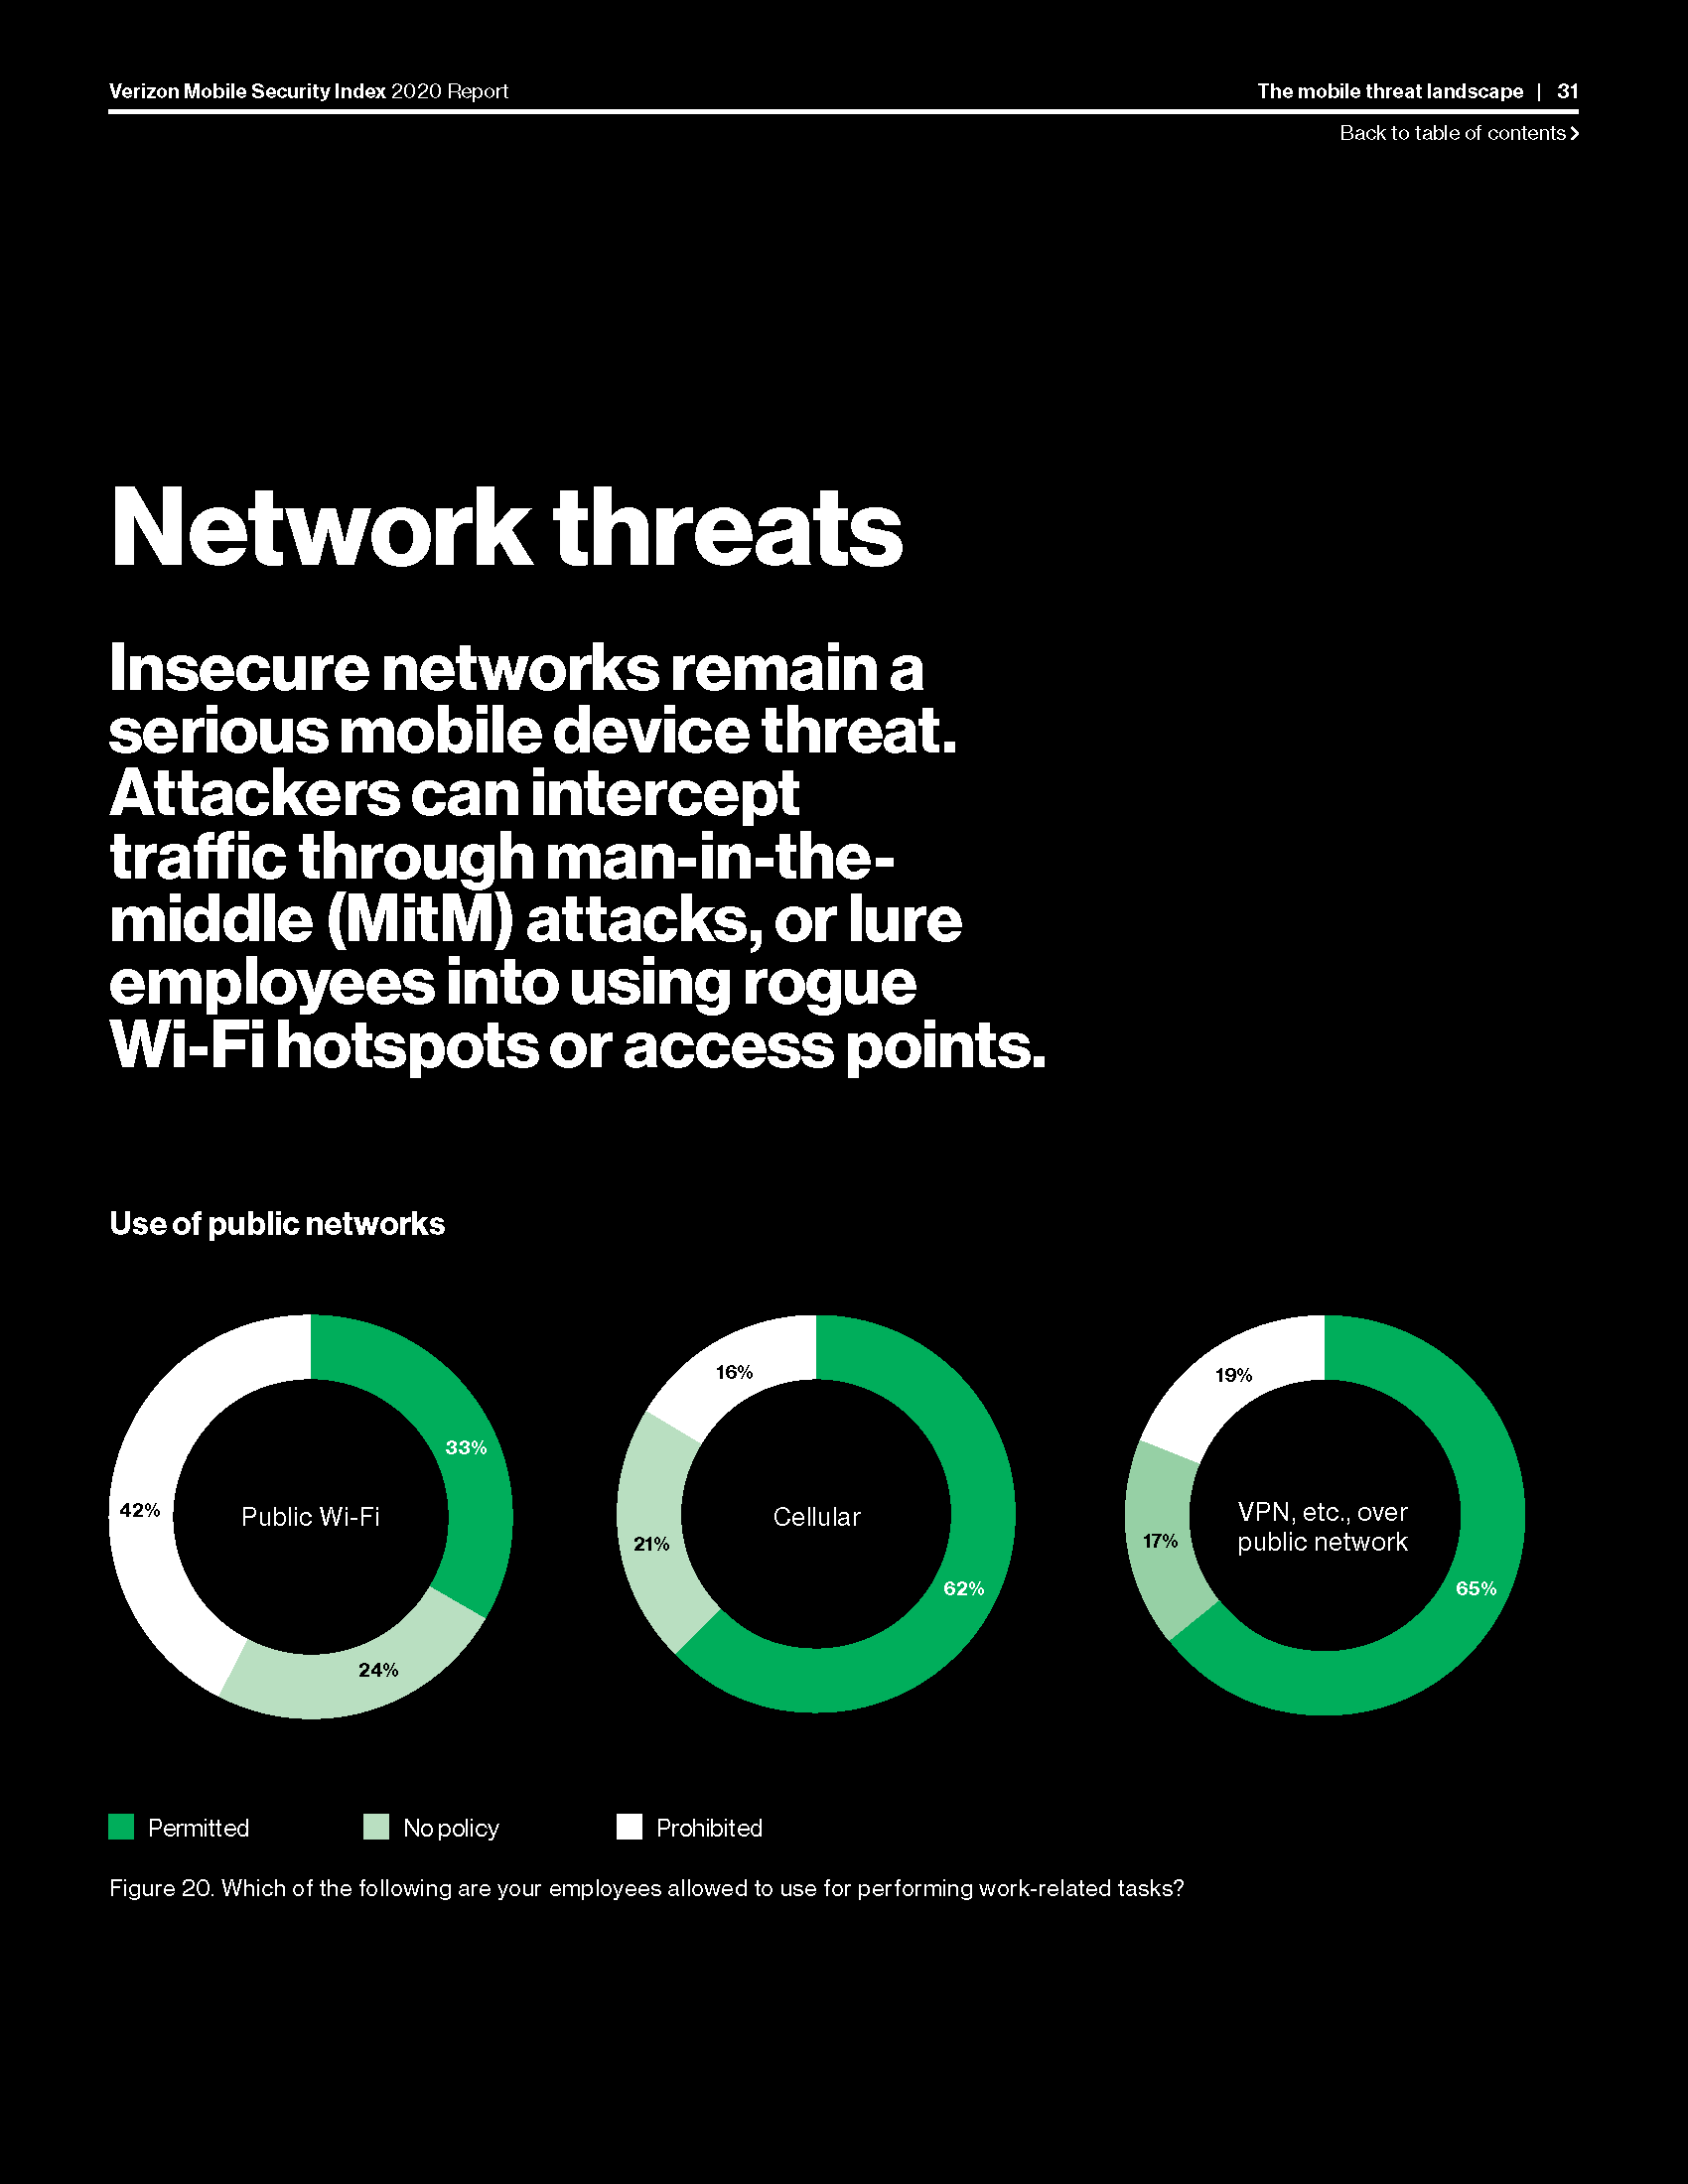 Excerpt from the Mobile Security Index 2020